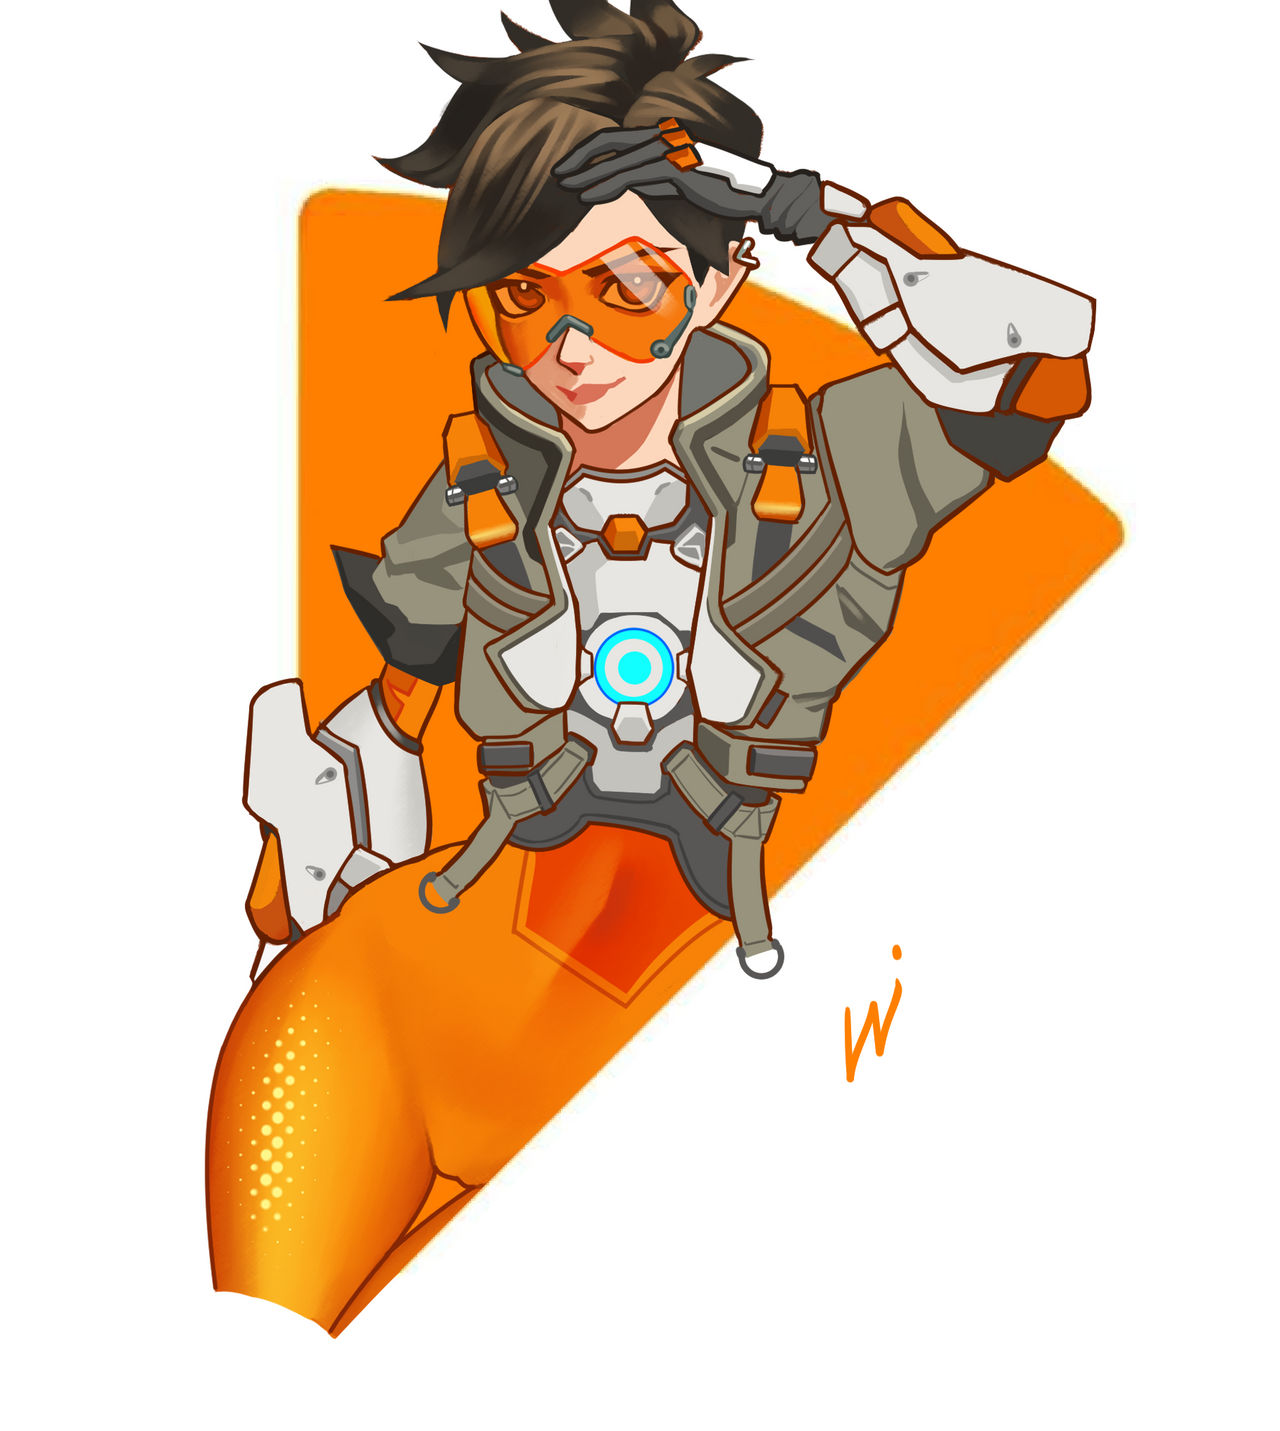 Tracer Overwatch by Evgeny Bubley